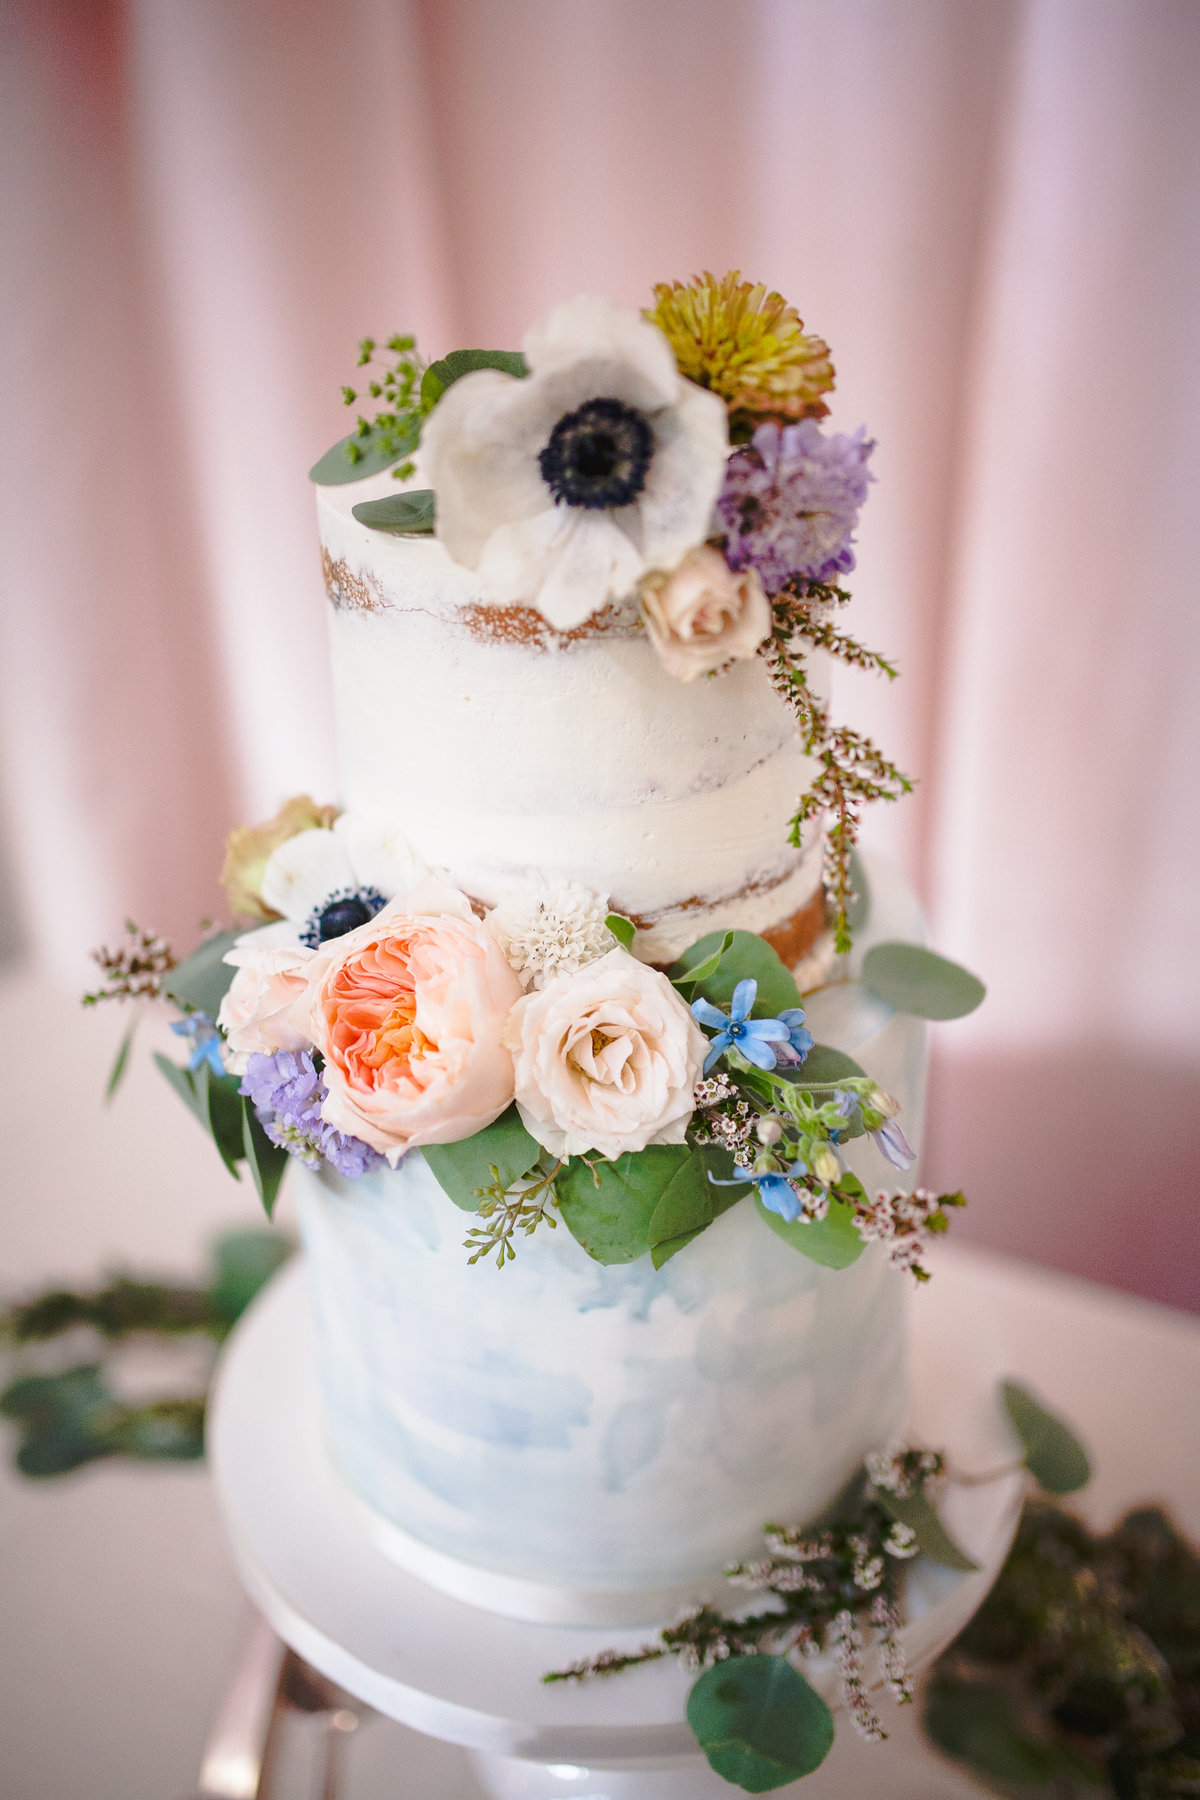 Multi tiered wedding cake with floral accents at a Missouri vineyard.